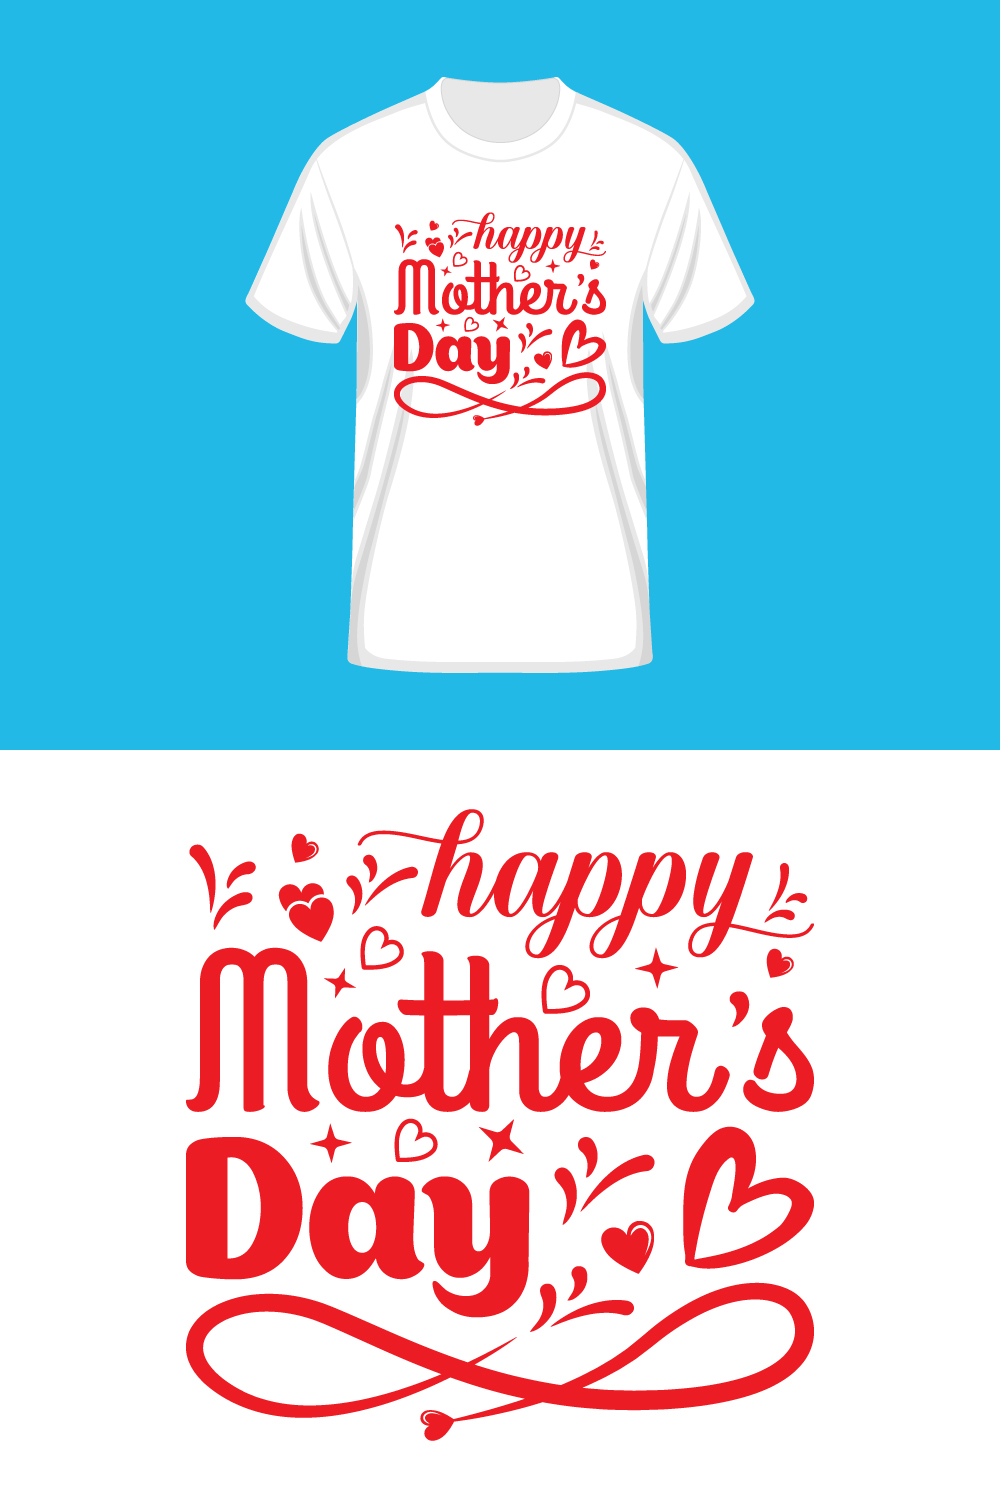 Happy mother's day t-shirt design only for $8 pinterest preview image.